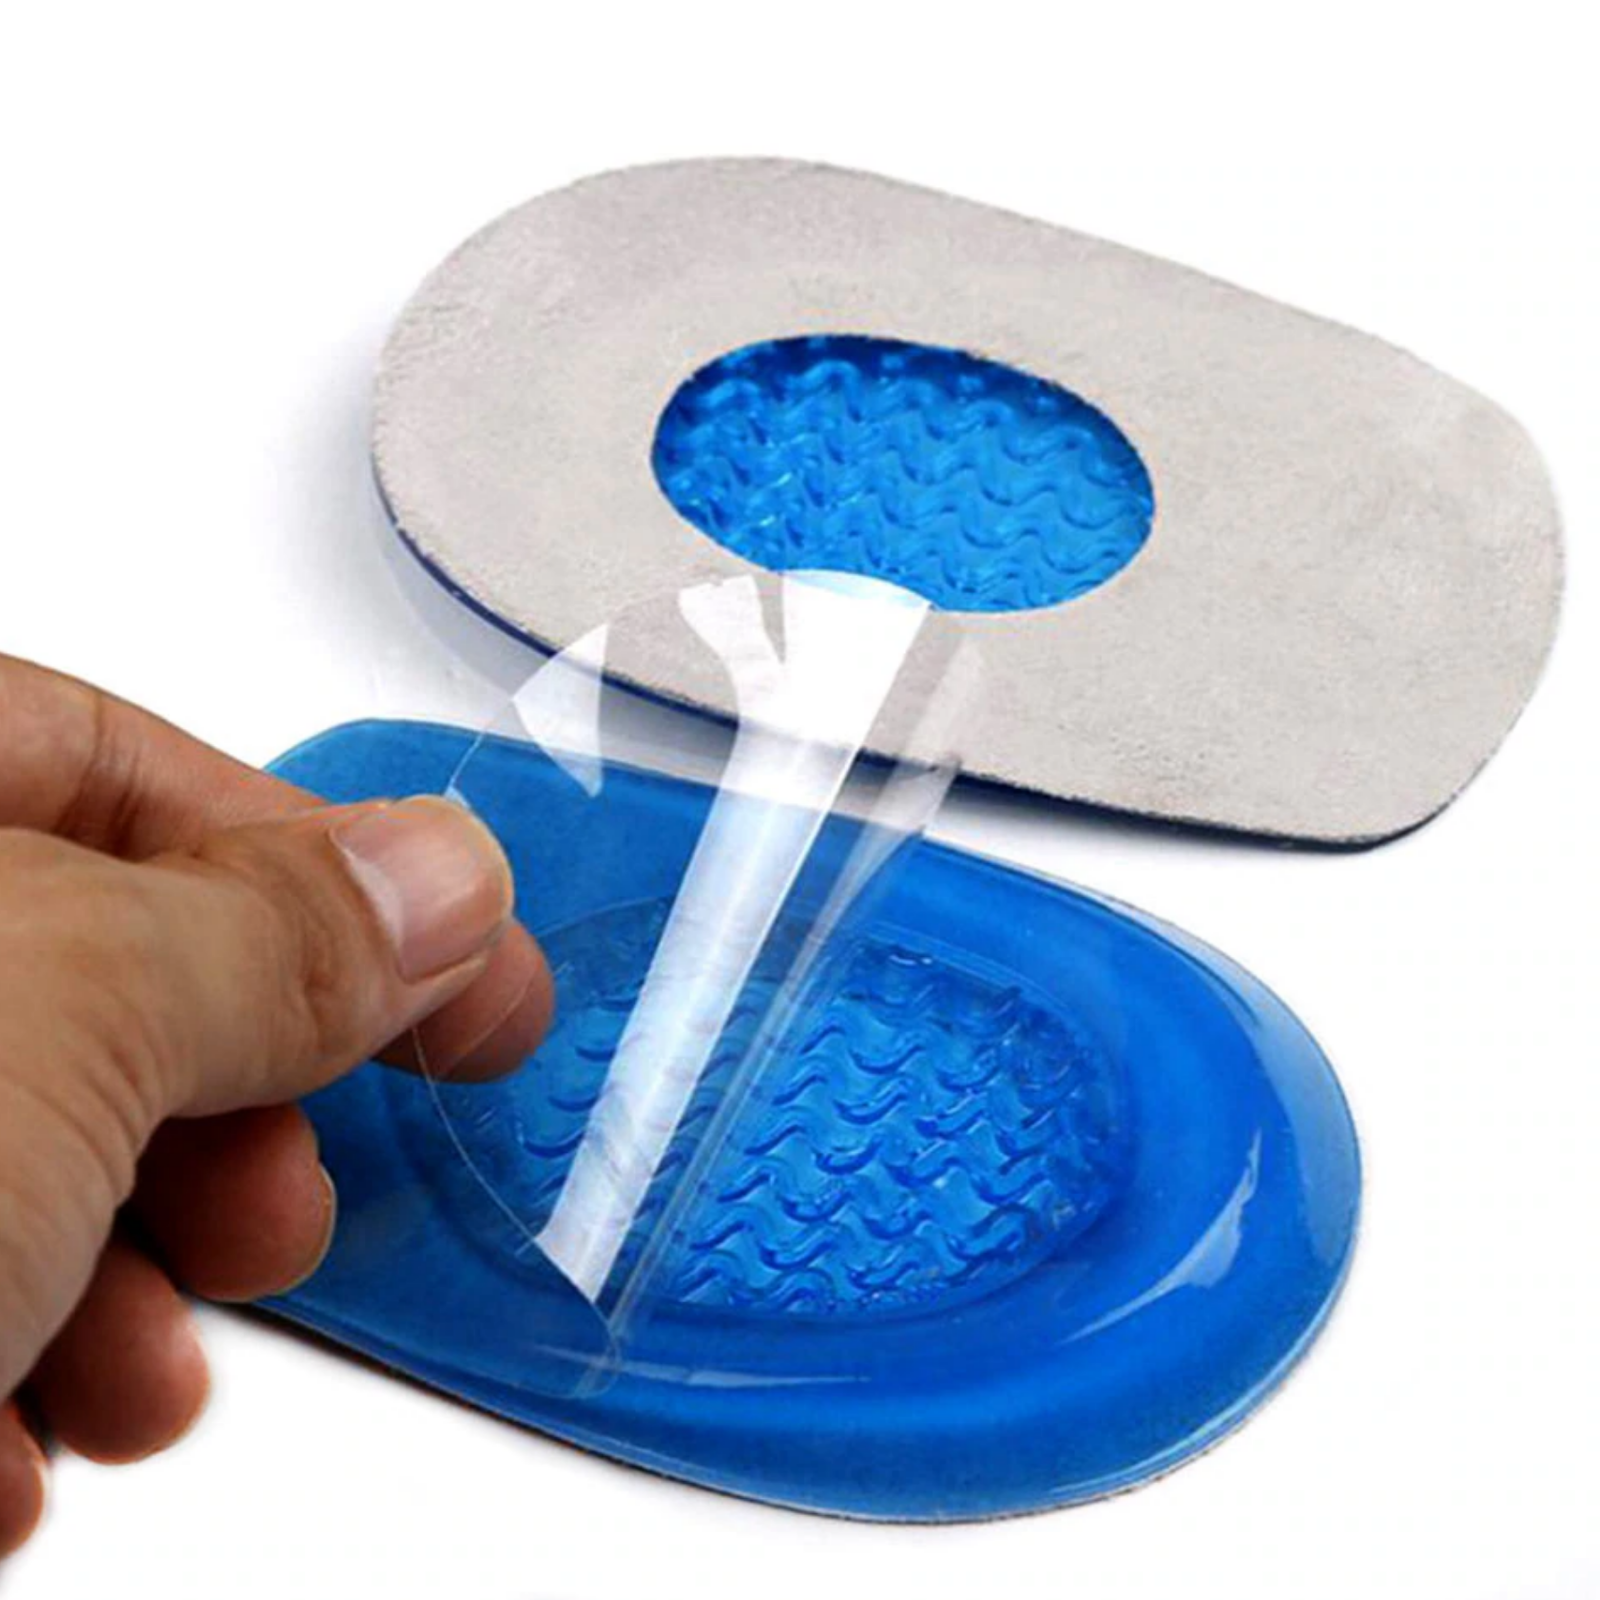 Gel Silicone Heel Support Shoe Pads Gel Orthotic Plantar Care Insert Insoles Cushion